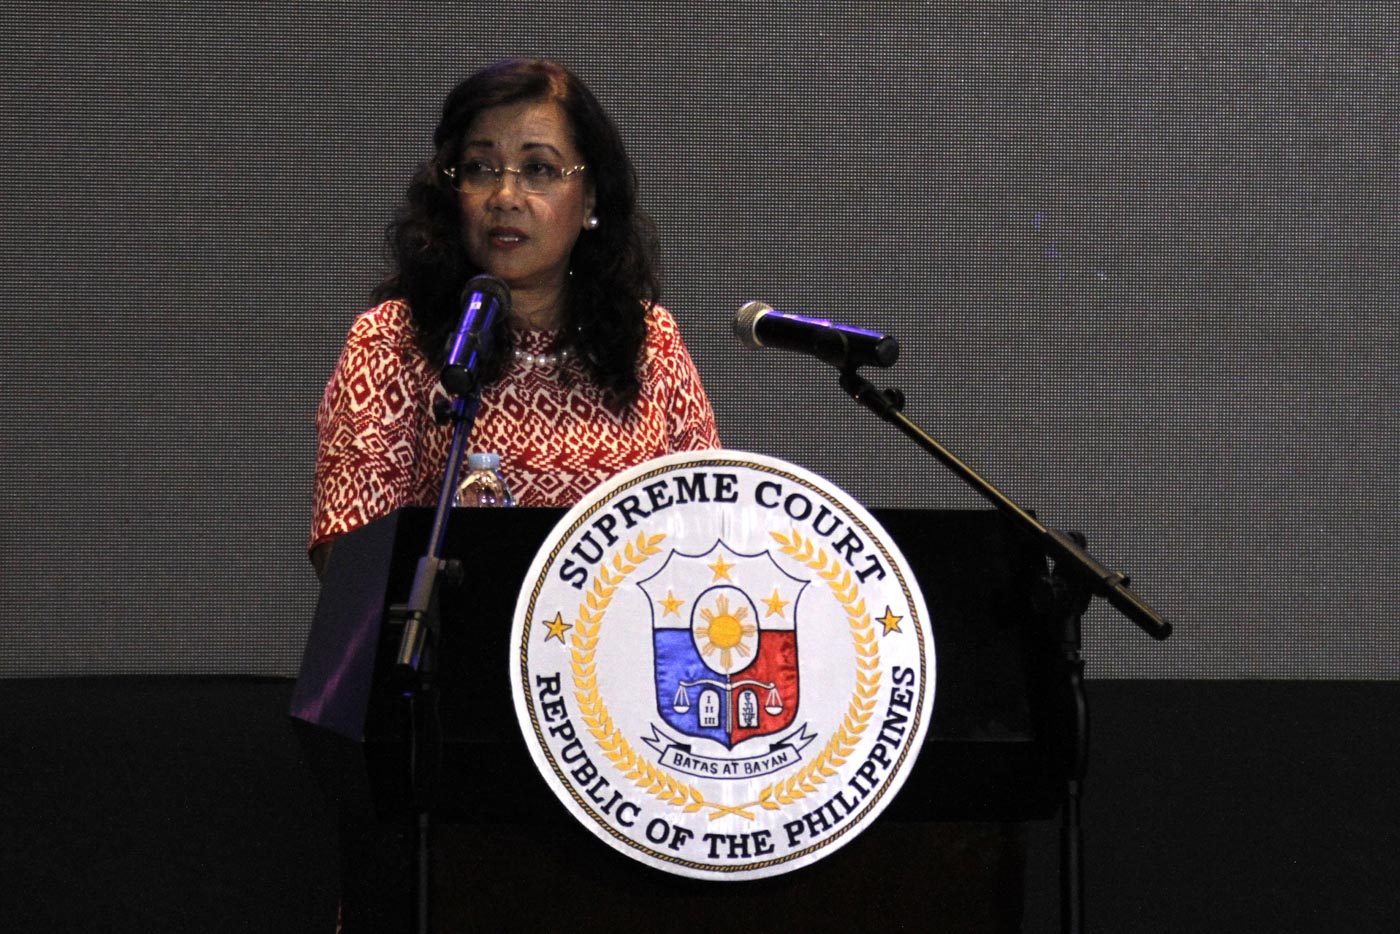 Umali warns House committee can have CJ Sereno arrested